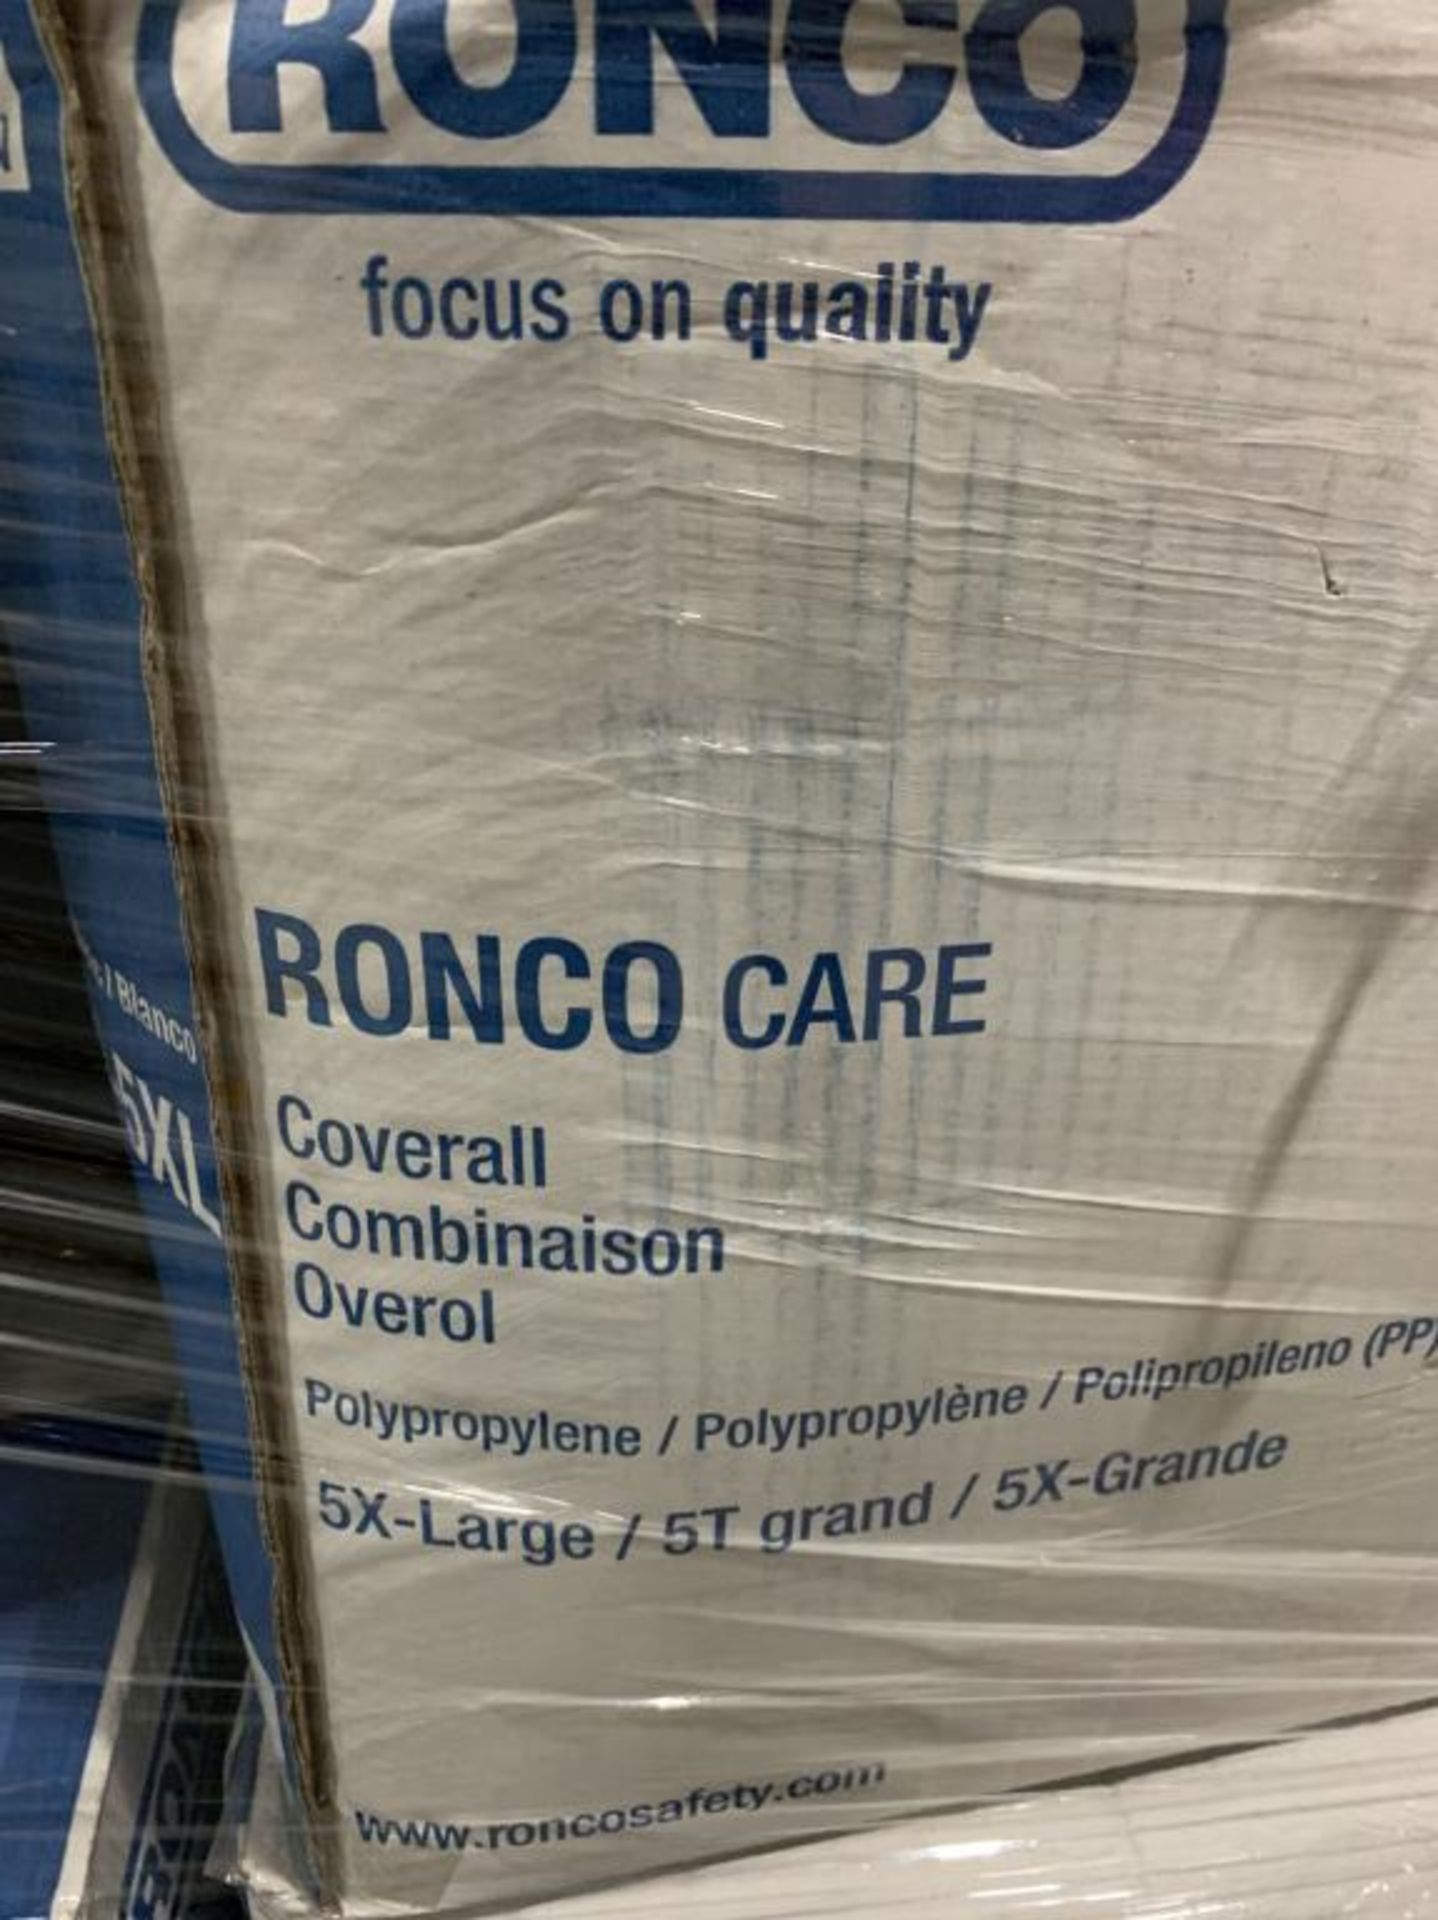 Ronco/Dupont Coveralls - Image 4 of 4